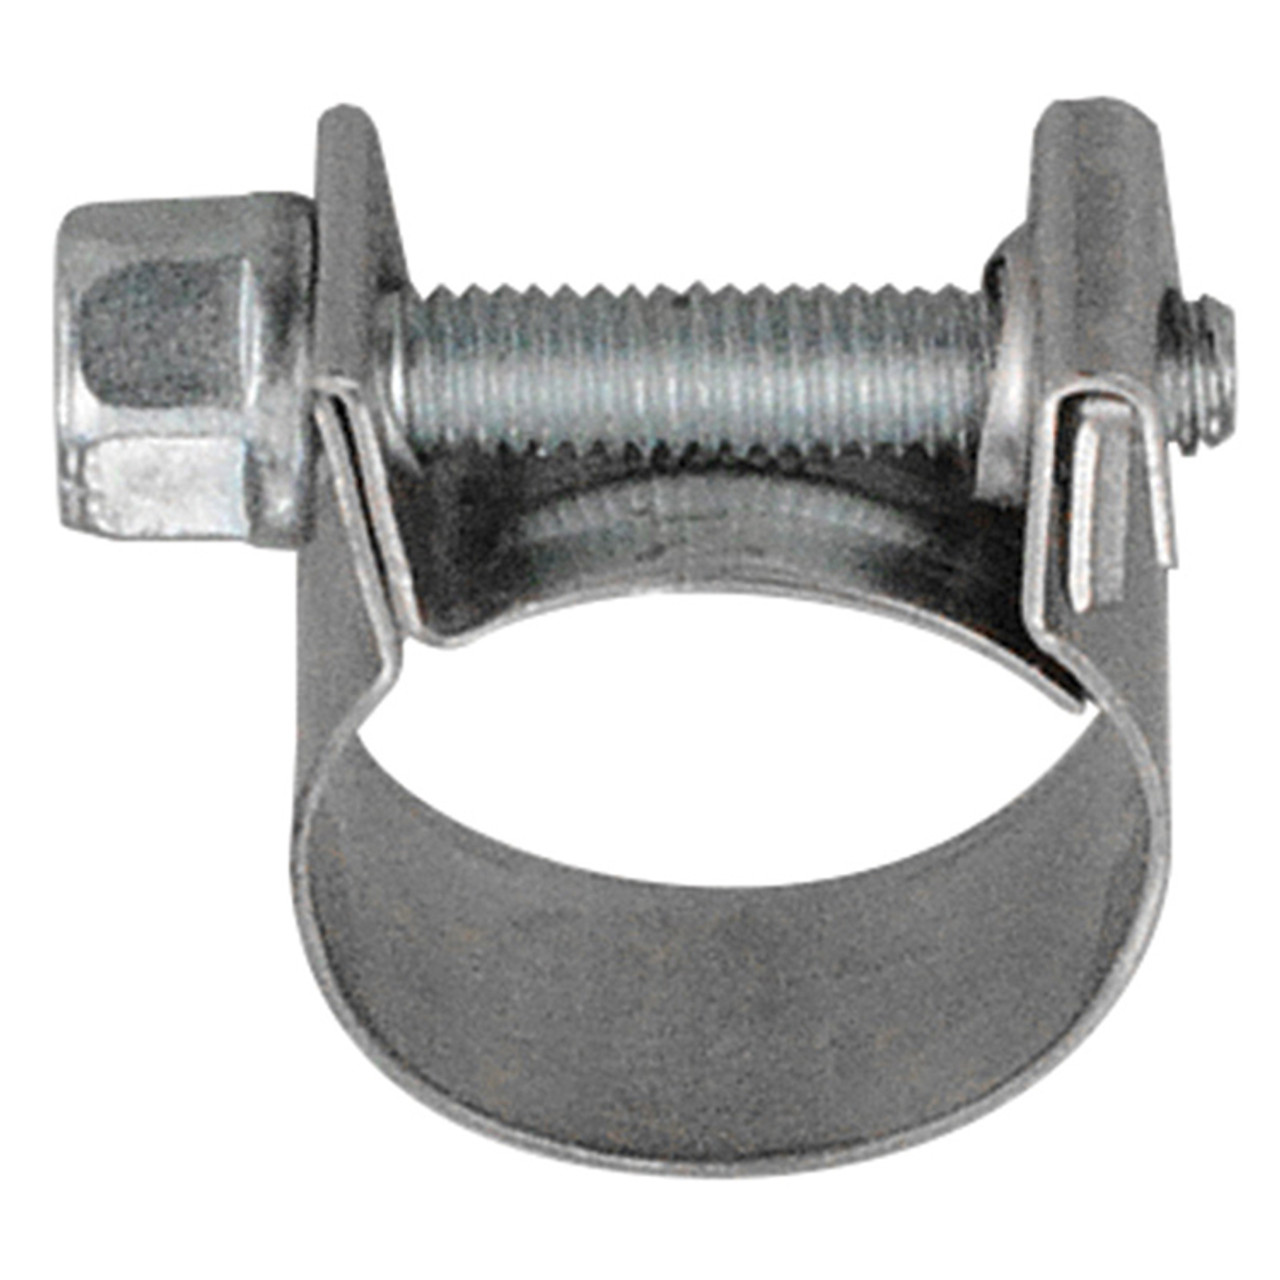 0.59 - 0.67" Stainless Mini T-Bolt Clamp  G5AB-1